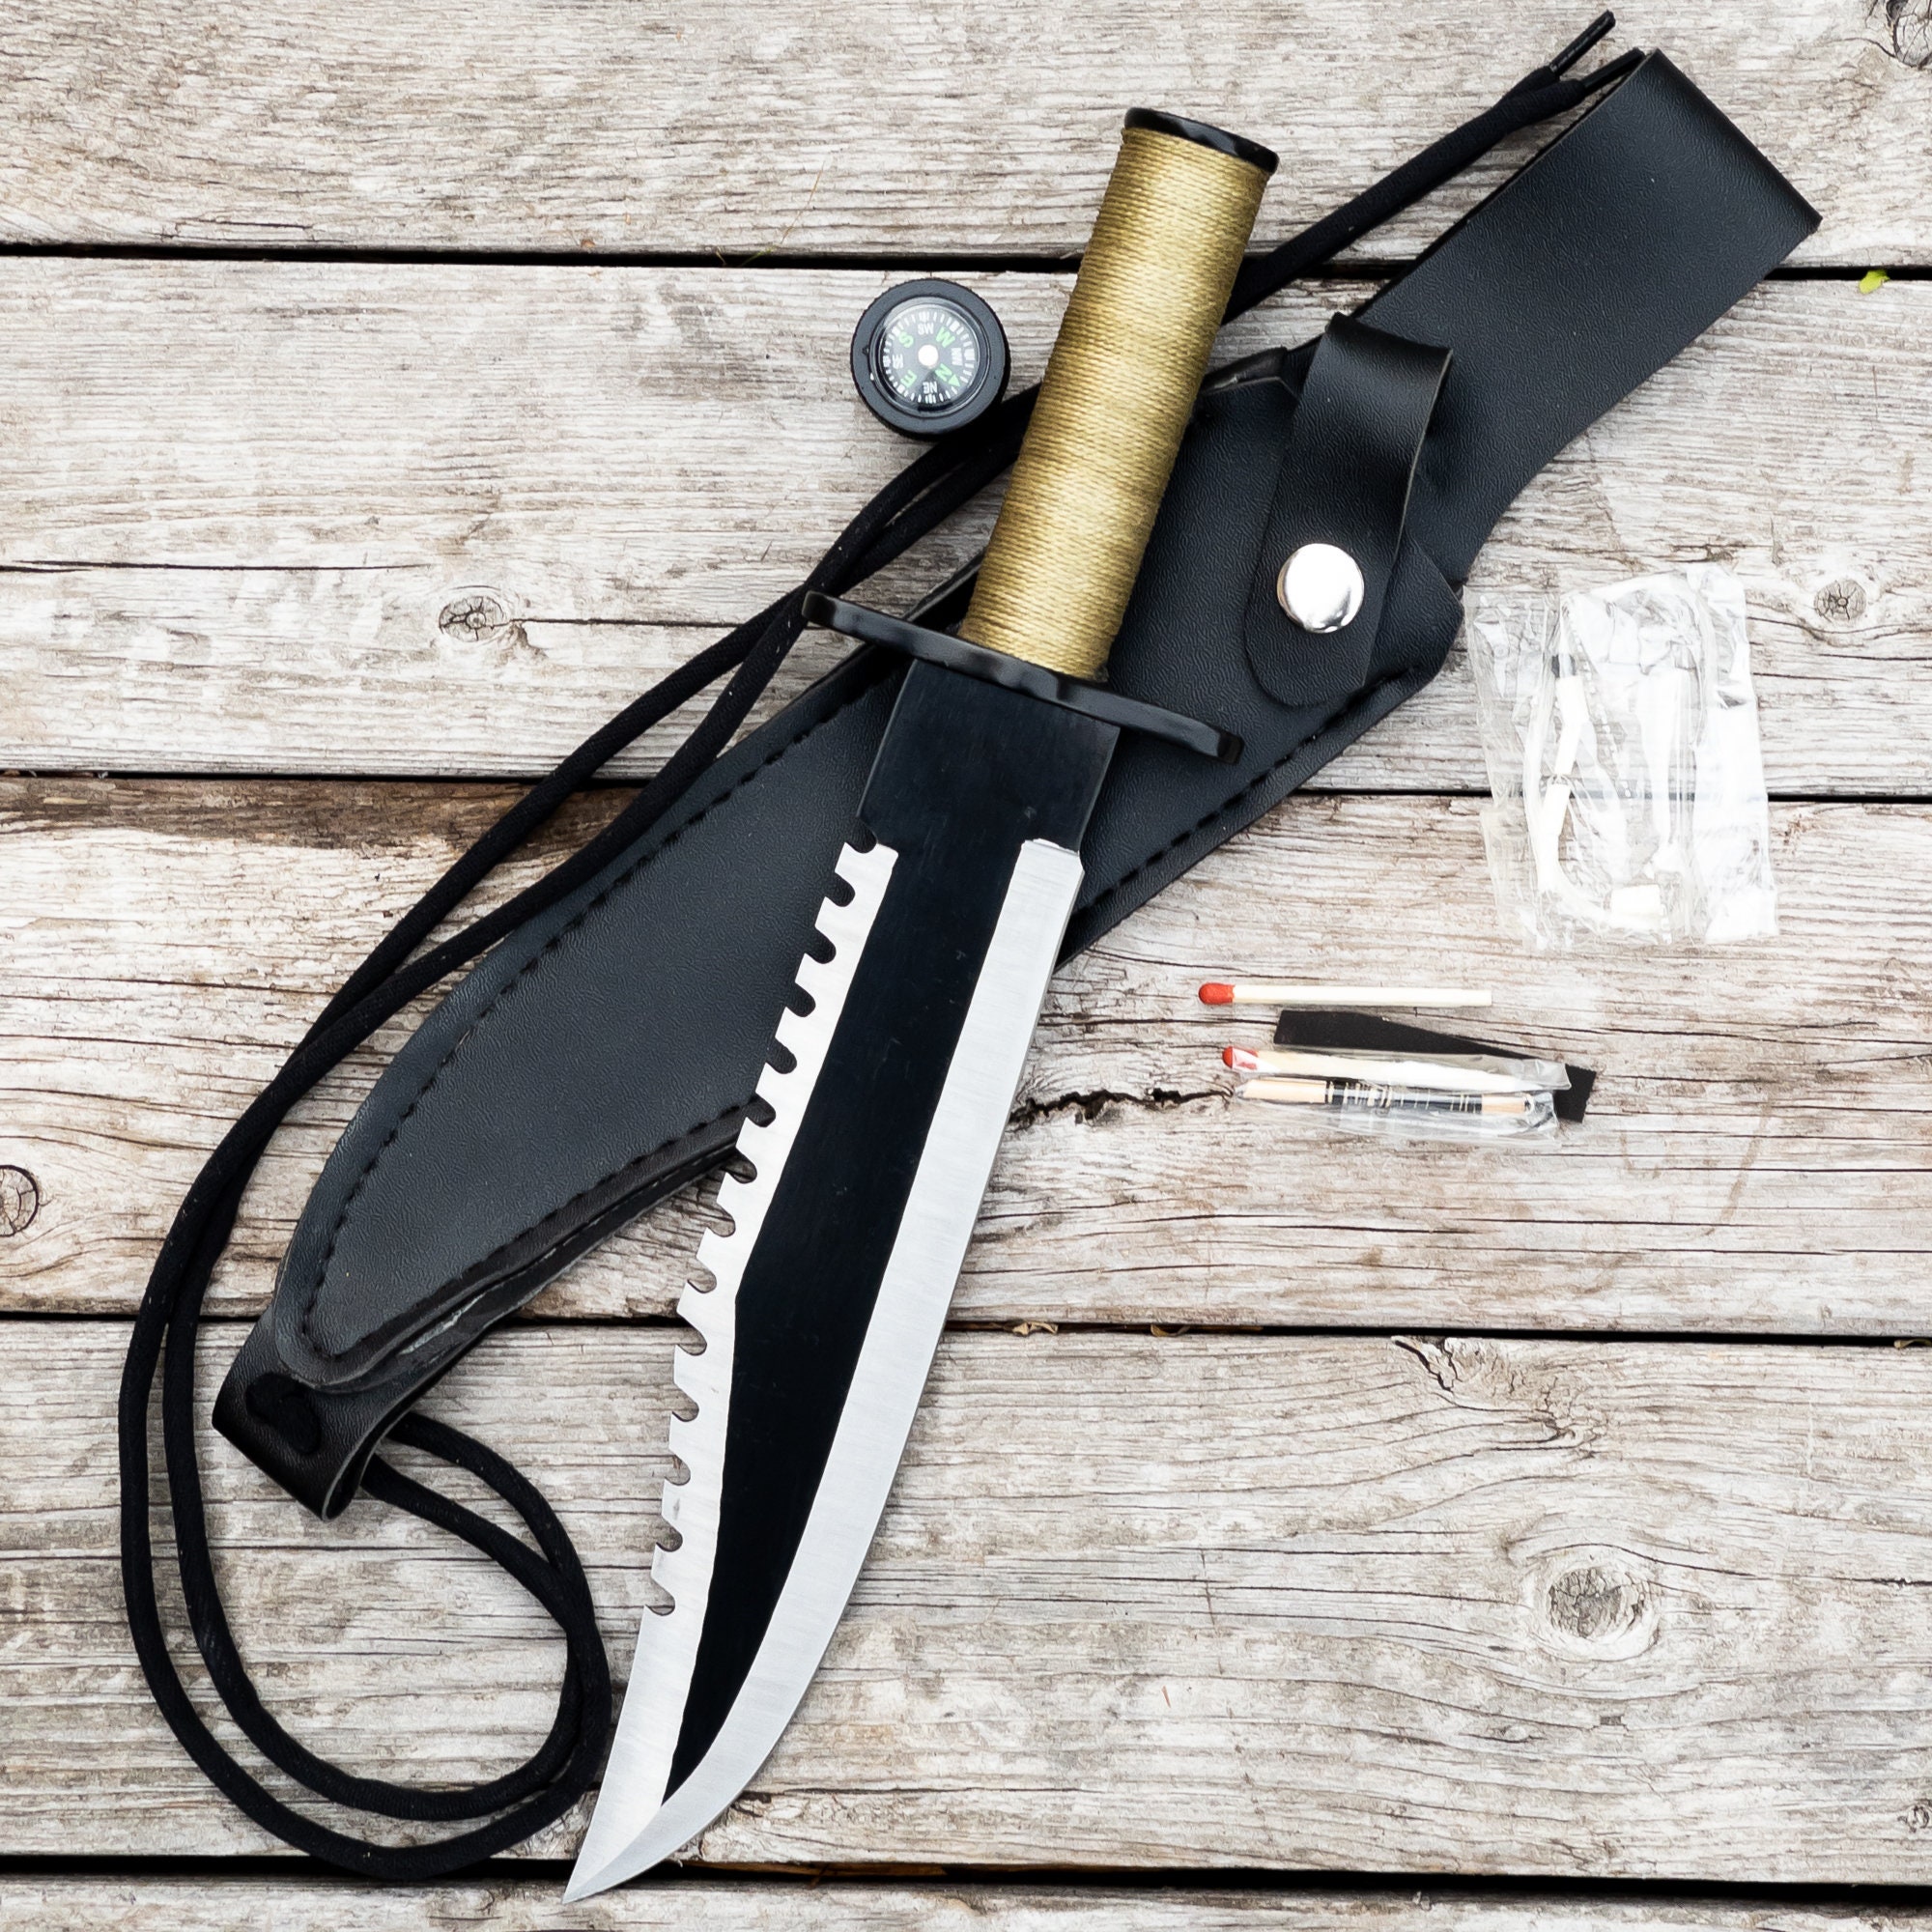 Survival Knife Hunting, 8-Inch Blade, Sheath, Compass 14087